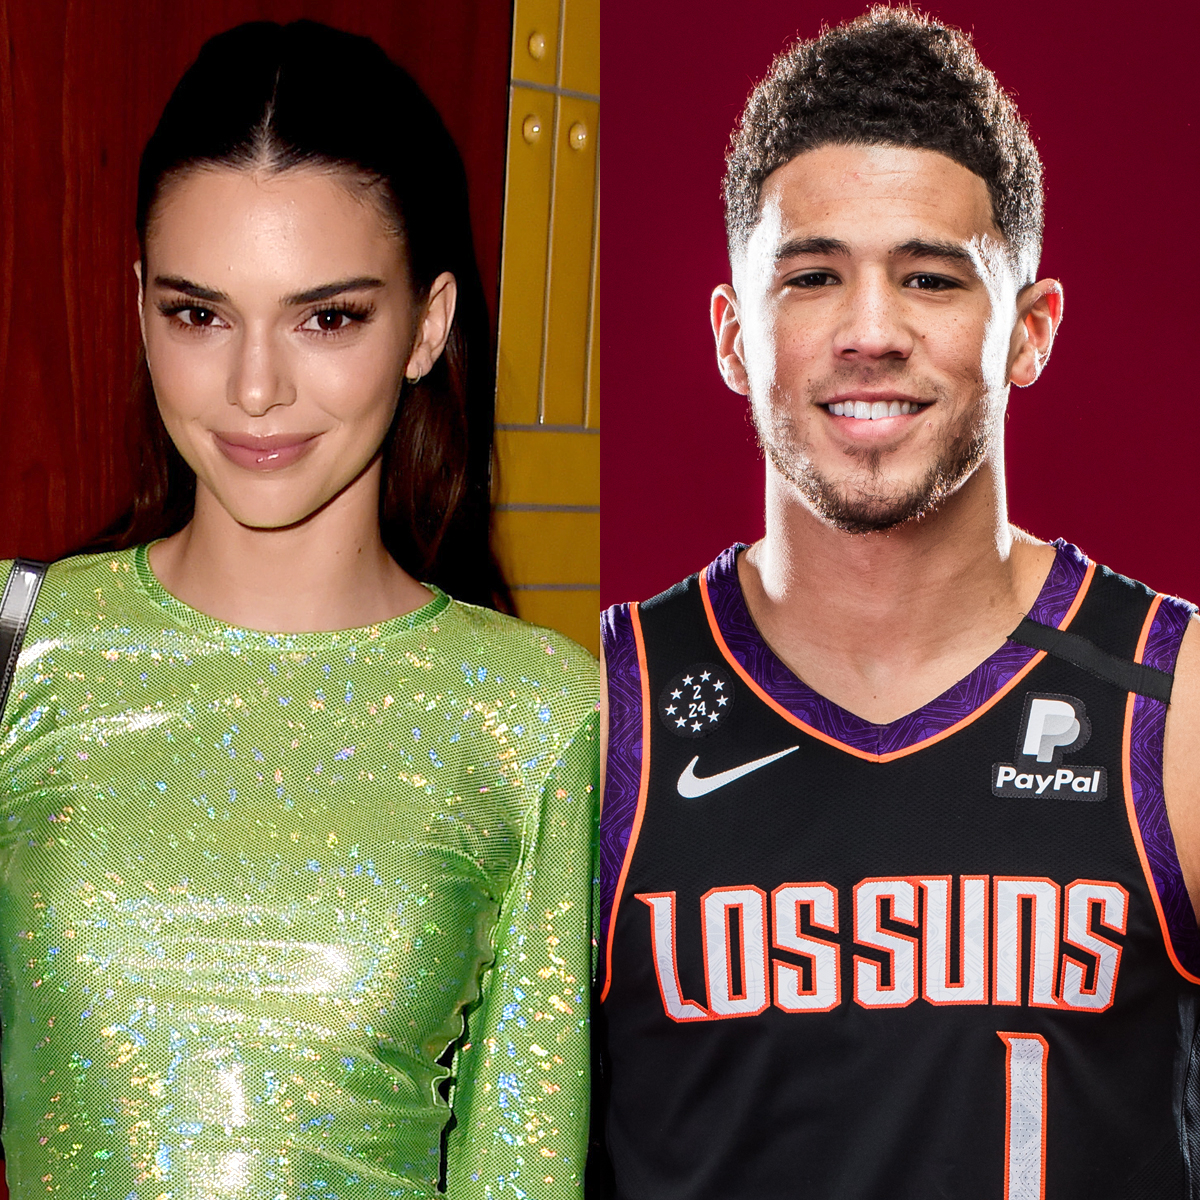 Definitive Proof Kendall Jenner Is Dating a Basketball Player